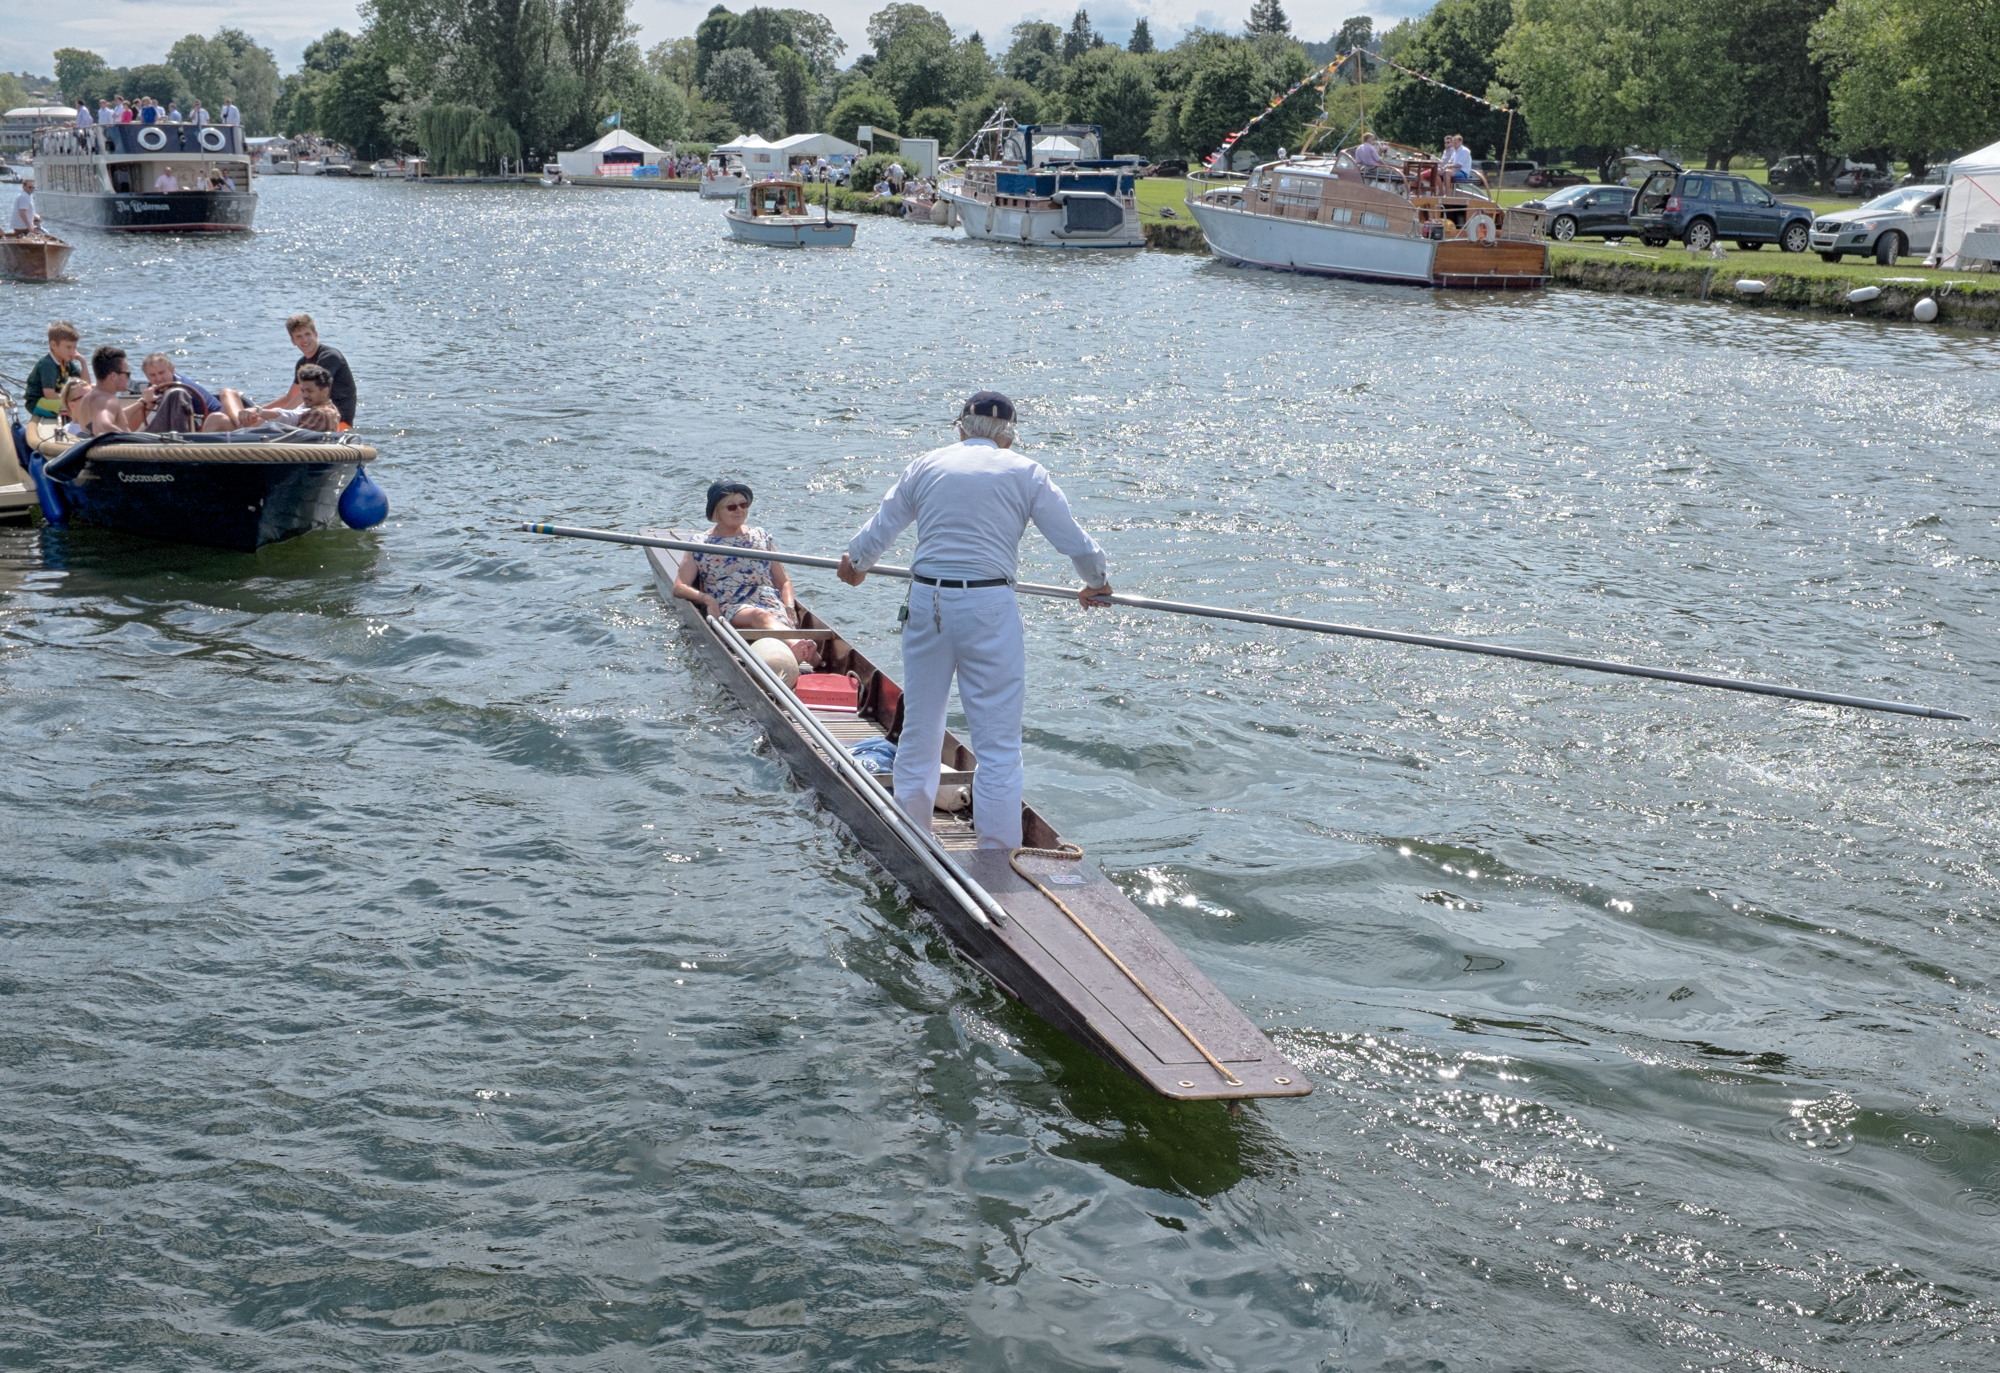  A spectator at Henley Royal Regatta takes to the water in a punt to watch the racing. Rowing boats, cruisers and bargers also plow up and down the 2.5km stretch of the river Thames to watch the events. 